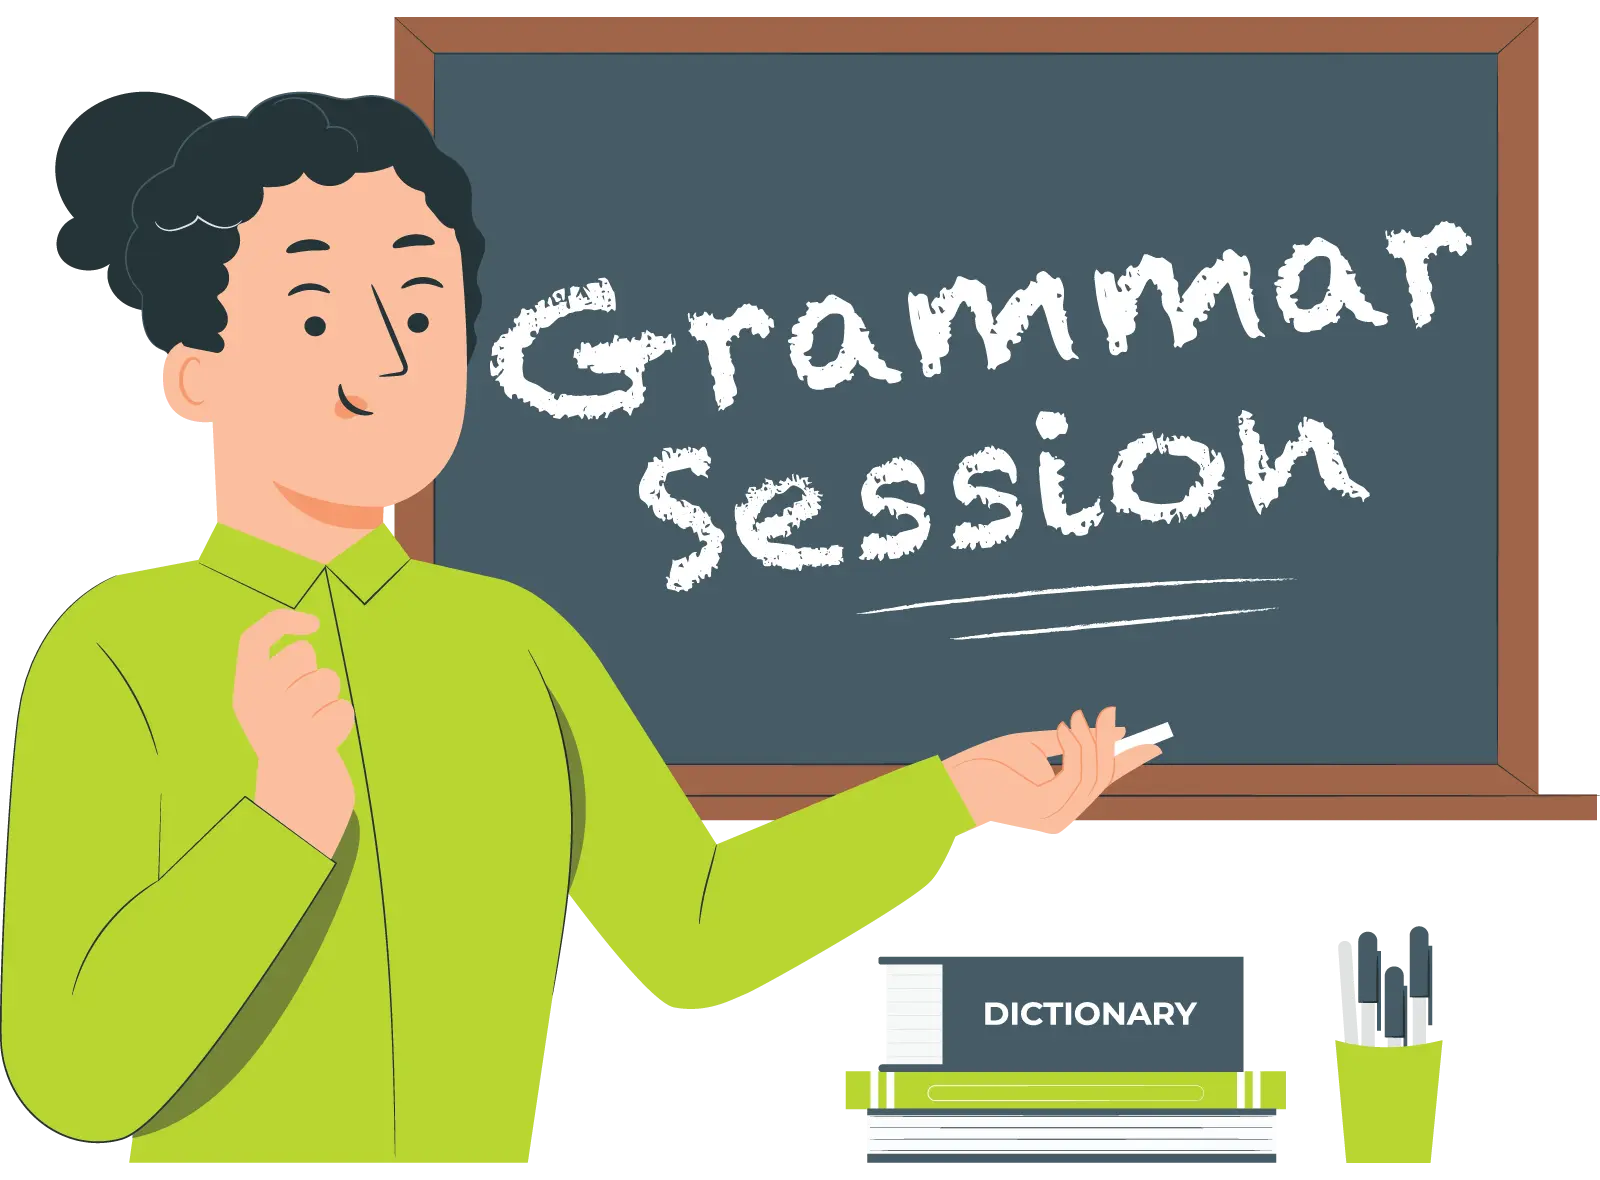 SPECIAL GRAMMAR SESSION FOR LANGUAGE CLARITY AND STRONG COMMUNICATION SKILLS